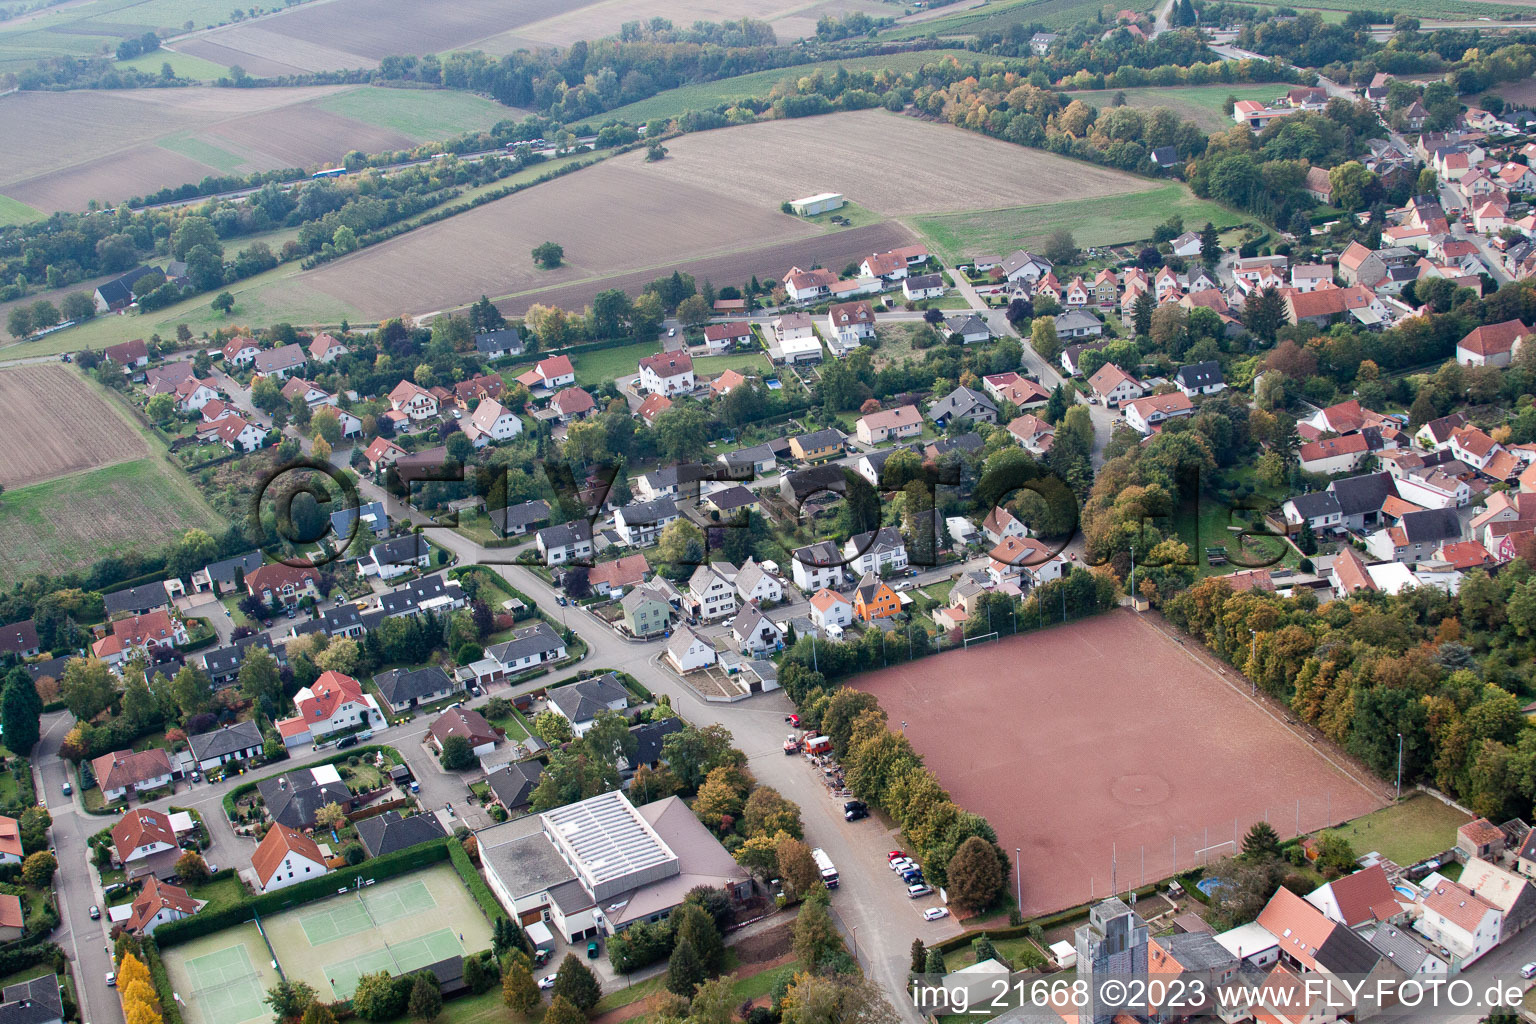 Aerial view of Eppelsheim in the state Rhineland-Palatinate, Germany